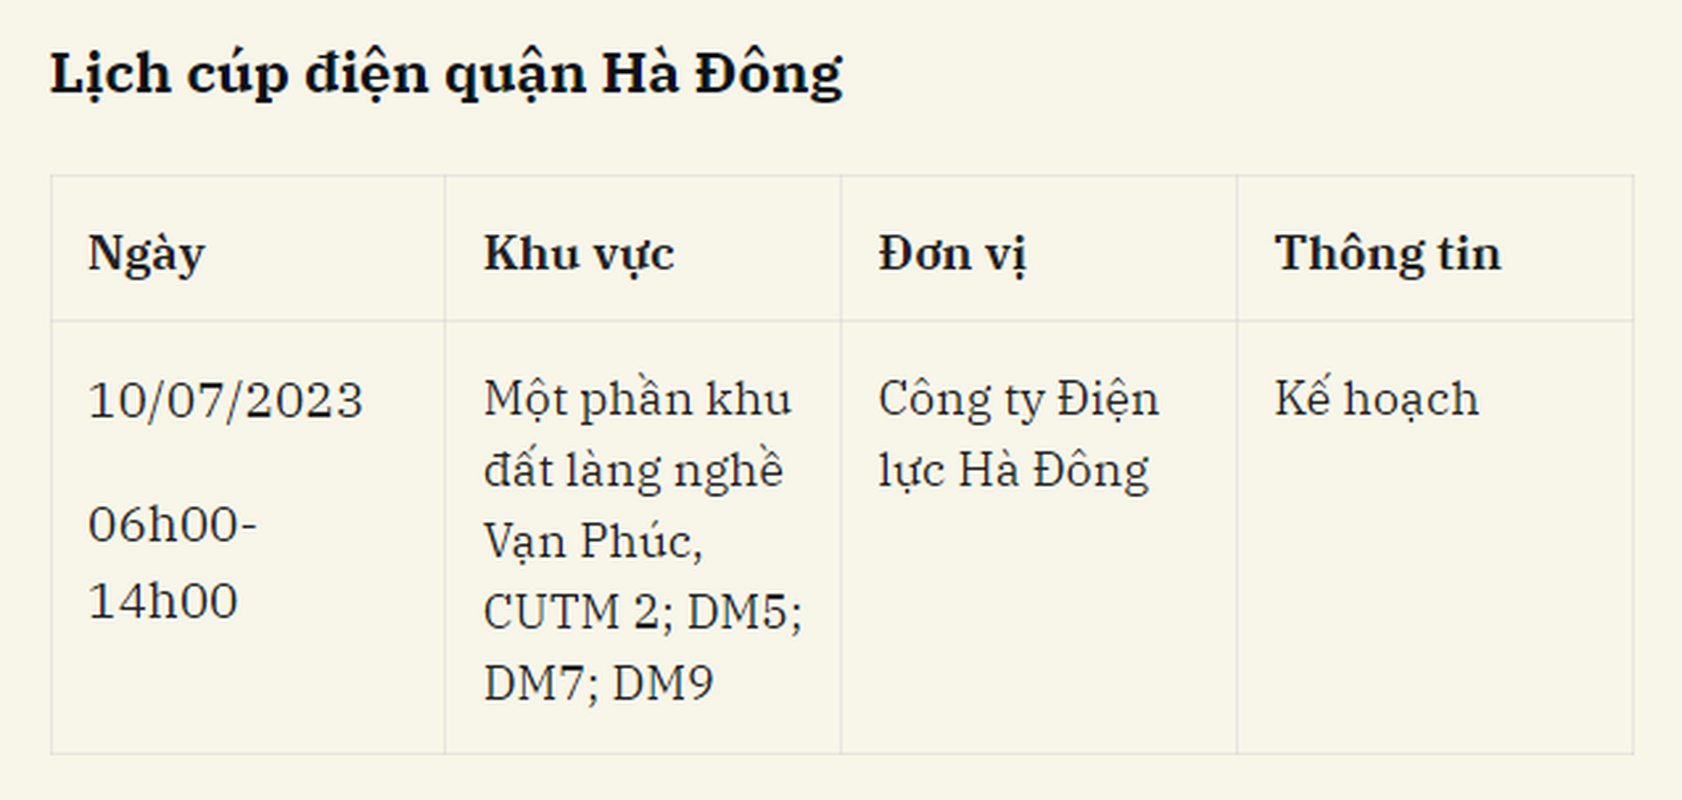 Lich cup dien Ha Noi ngay 10/7/2023-Hinh-6